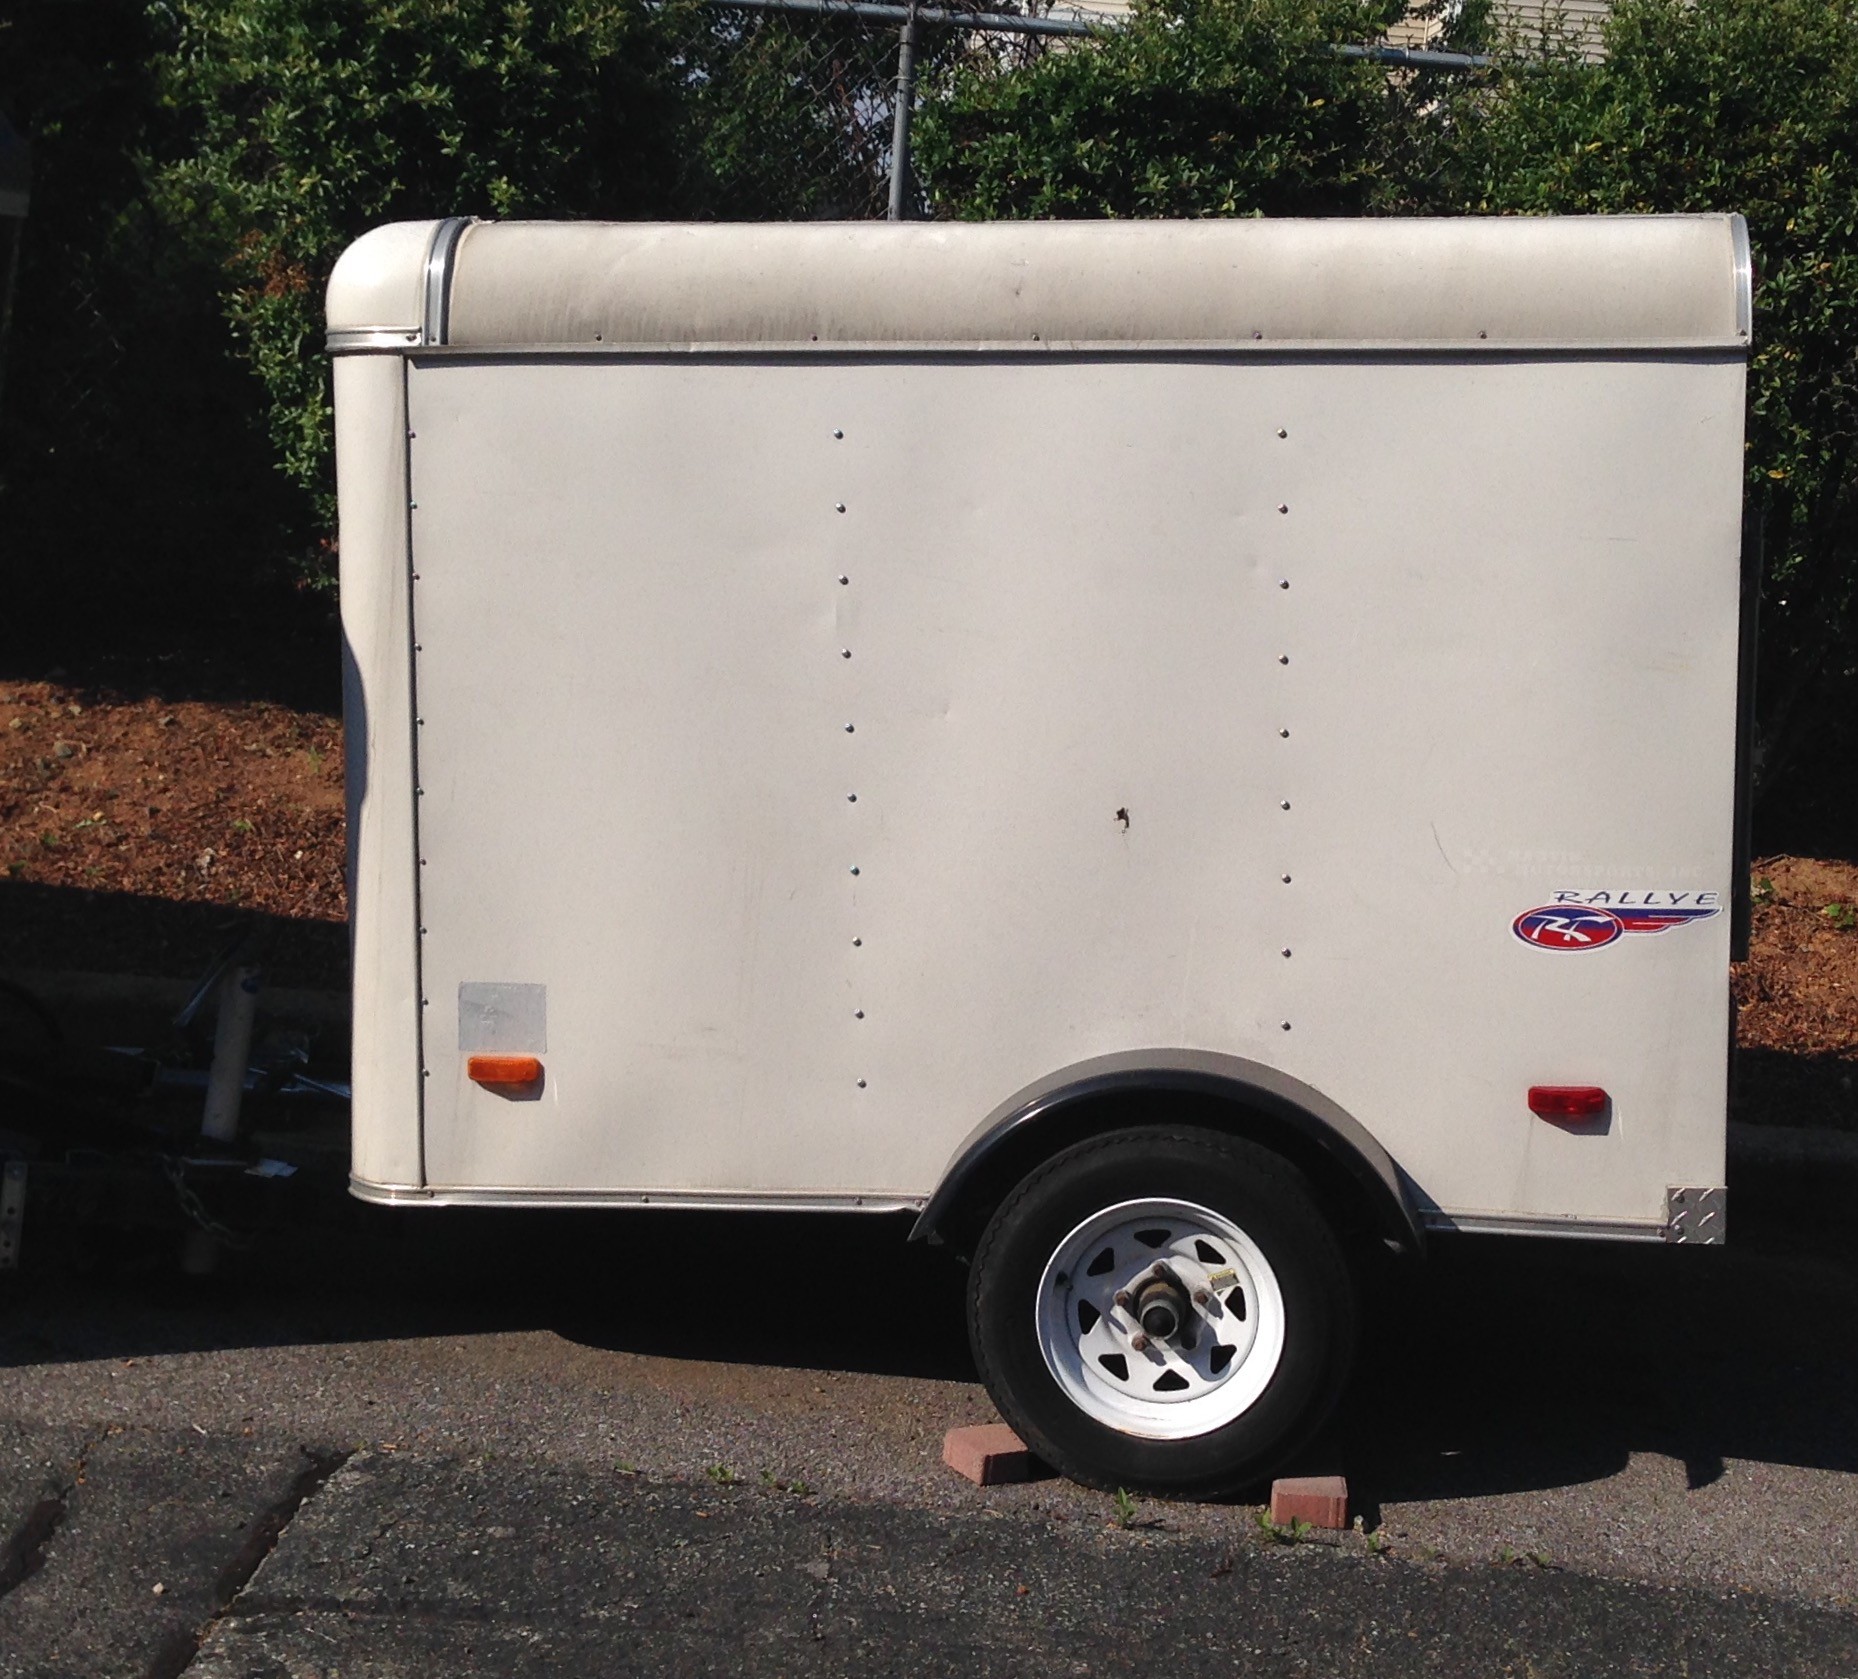 Buy & Sell New & Used Trailers 2000 Pace American Enclosed Cargo Trailer at TrailerShopper